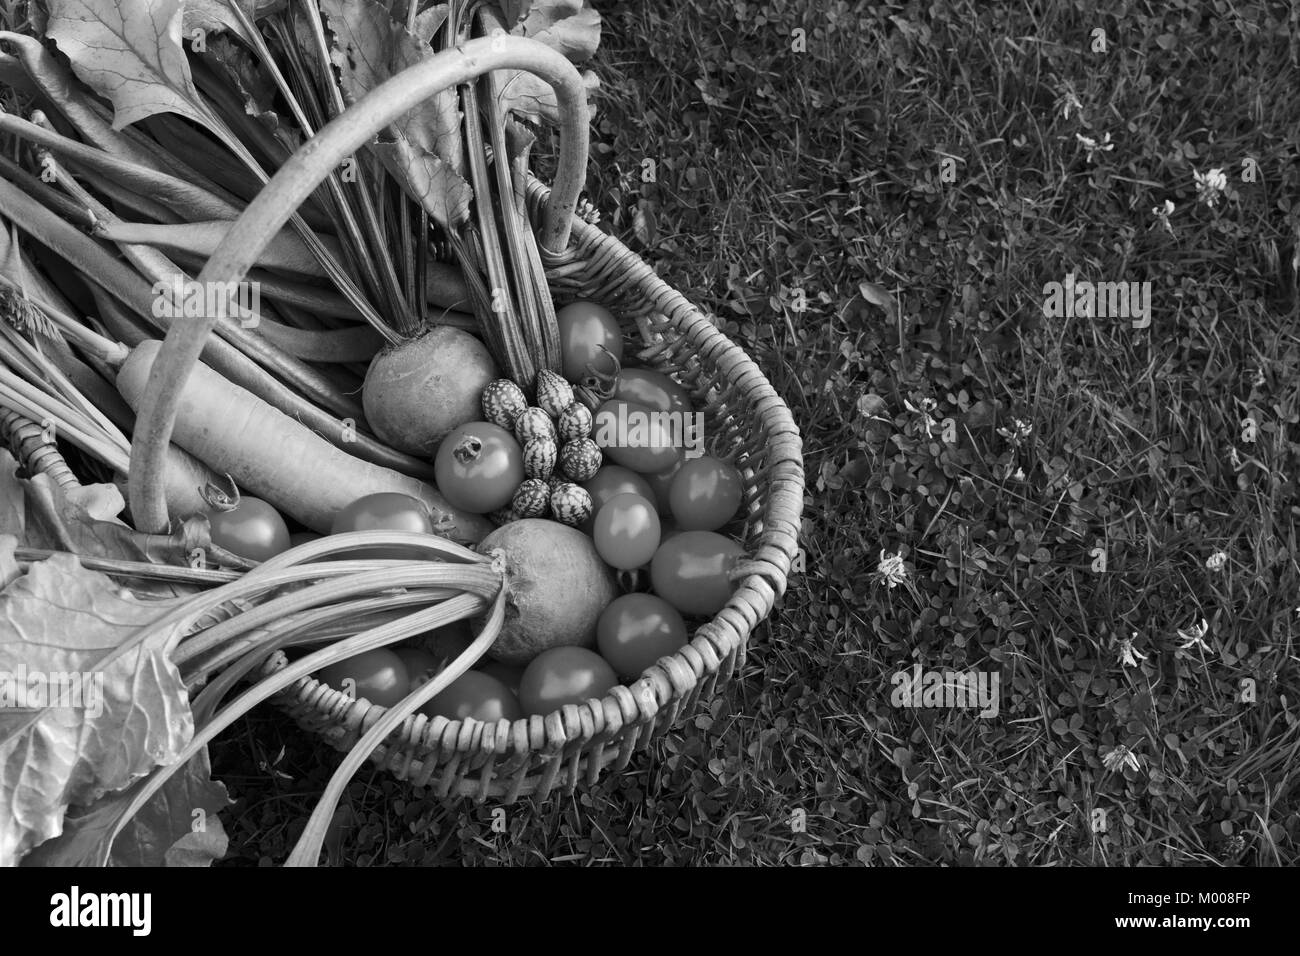 Rustic woven basket filled with fresh vegetables from an allotment - carrots, beets, tomatoes and cucamelons - with copy space on grass - monochrome p Stock Photo